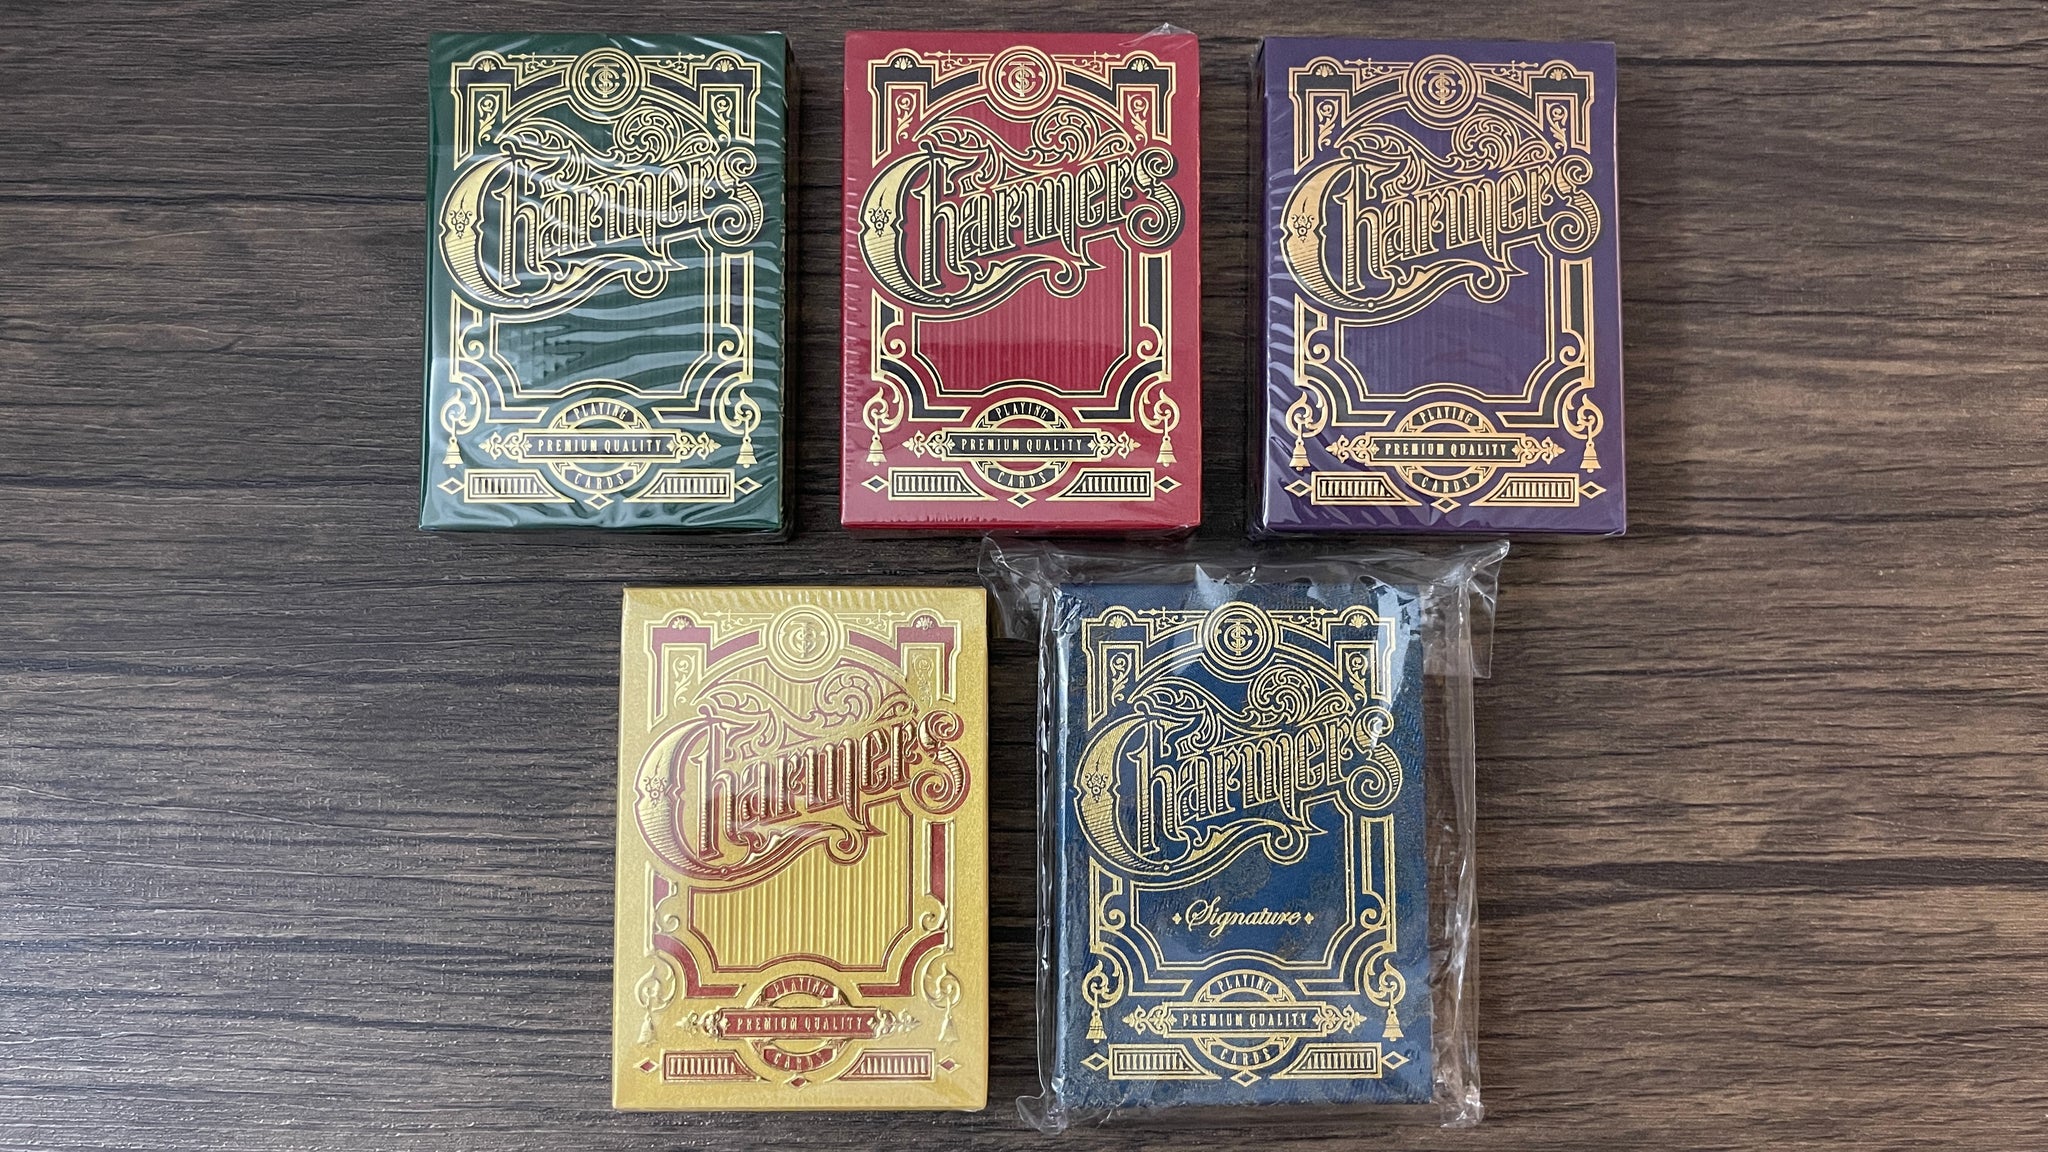 Charmers Set [AUCTION]